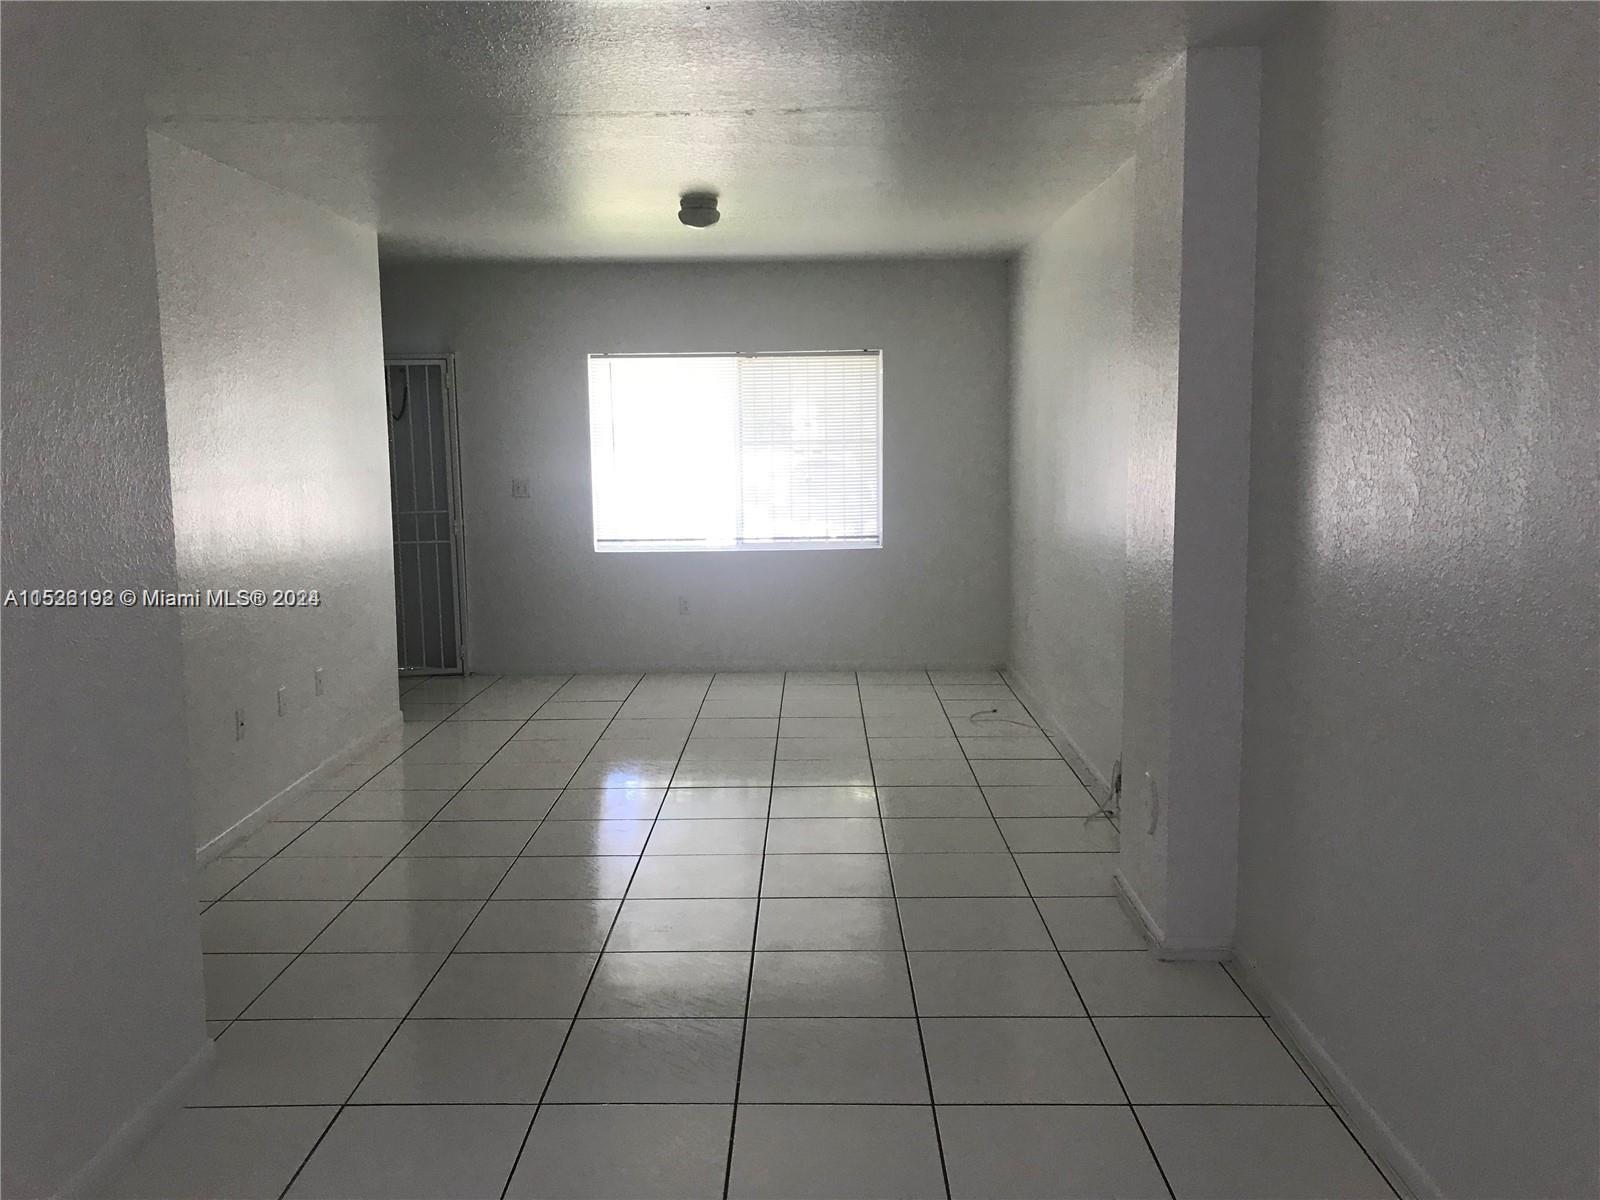 Property for Sale at 8463 Nw 4th Ct Ct 8463, Miami, Broward County, Florida - Bedrooms: 3 
Bathrooms: 2  - $235,000